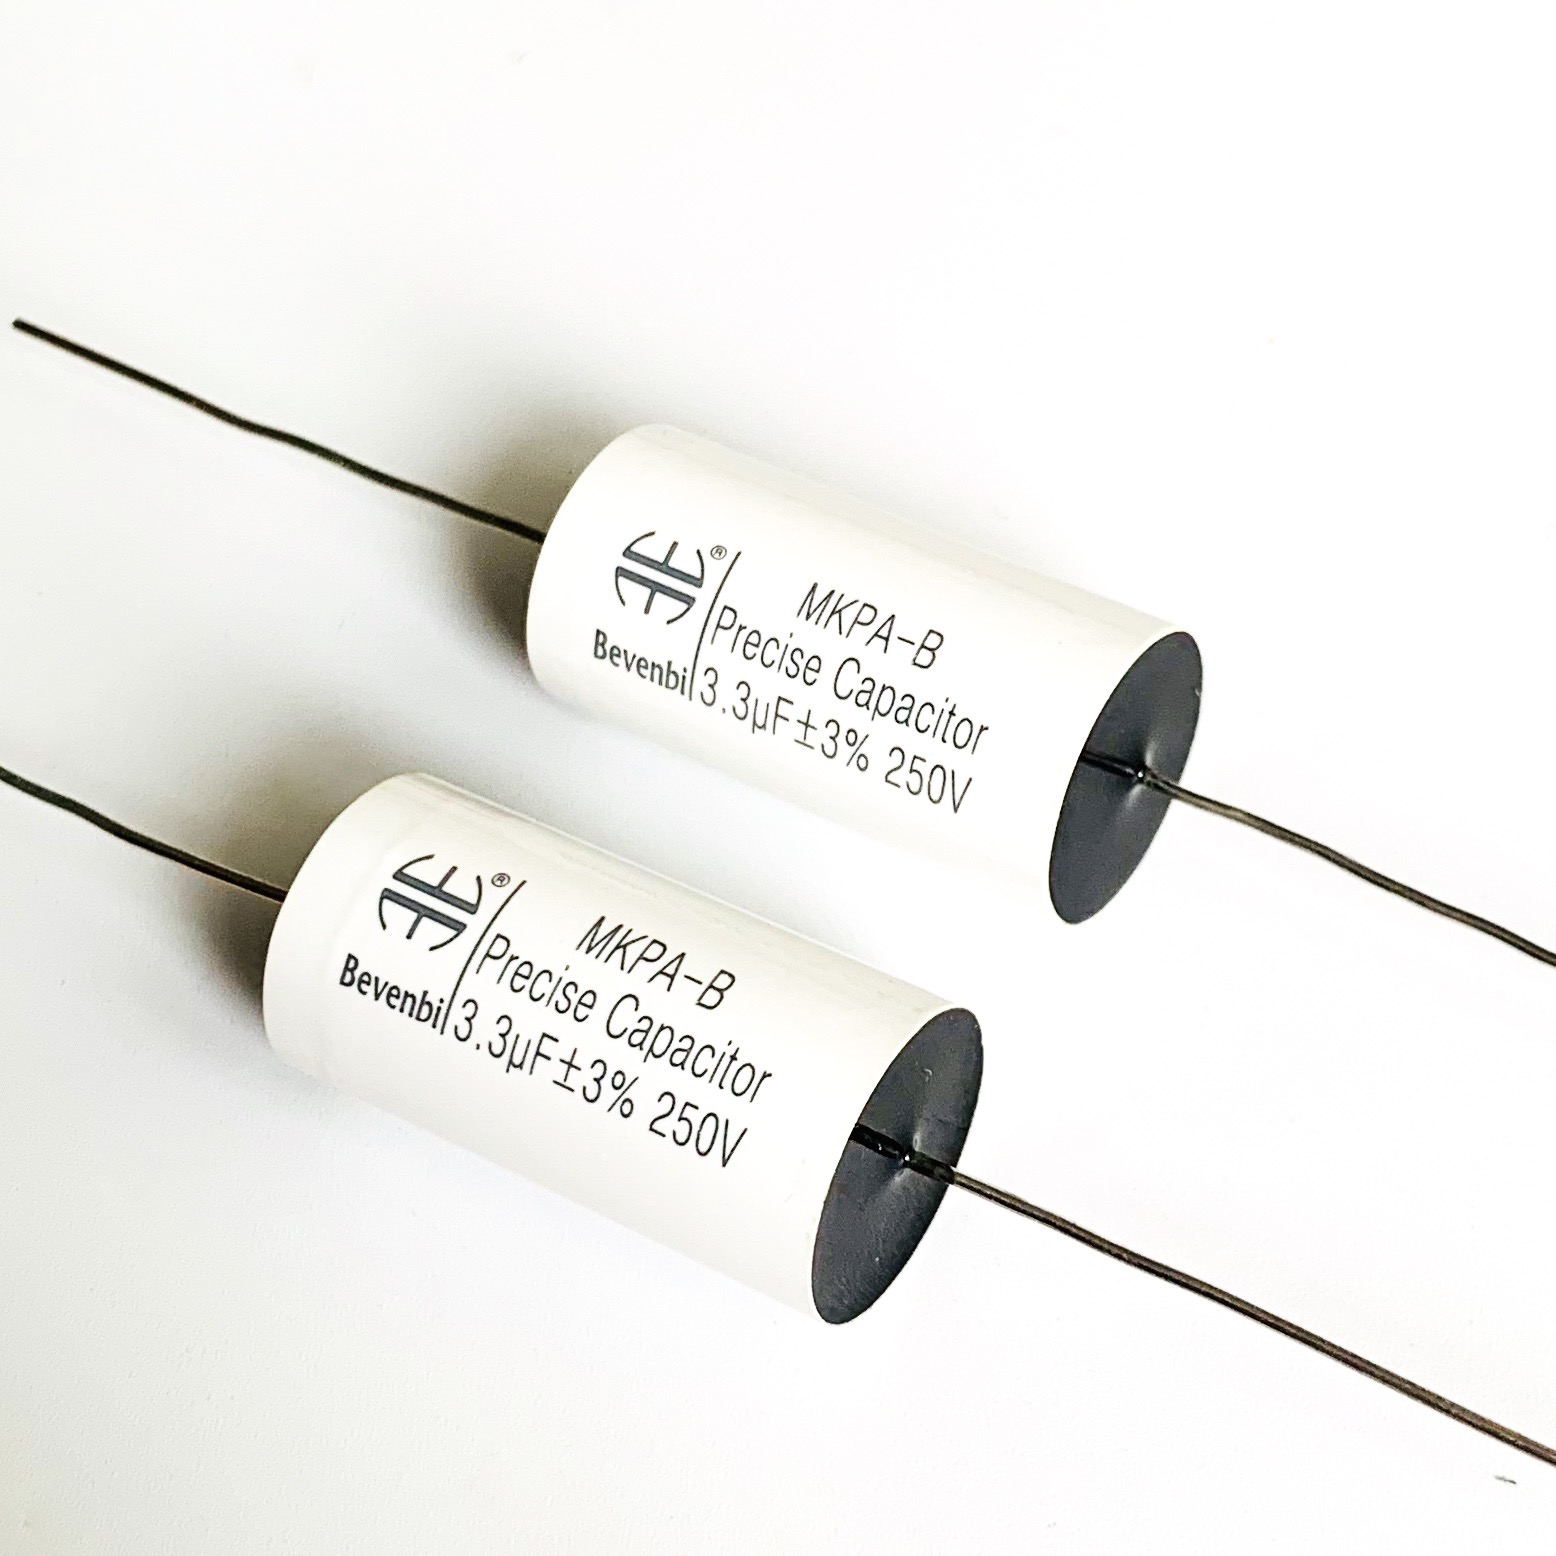 PriceList for Cbb81(Pps) - HI-END PP CAPACITORS MKPA-B – A Friend Featured Image